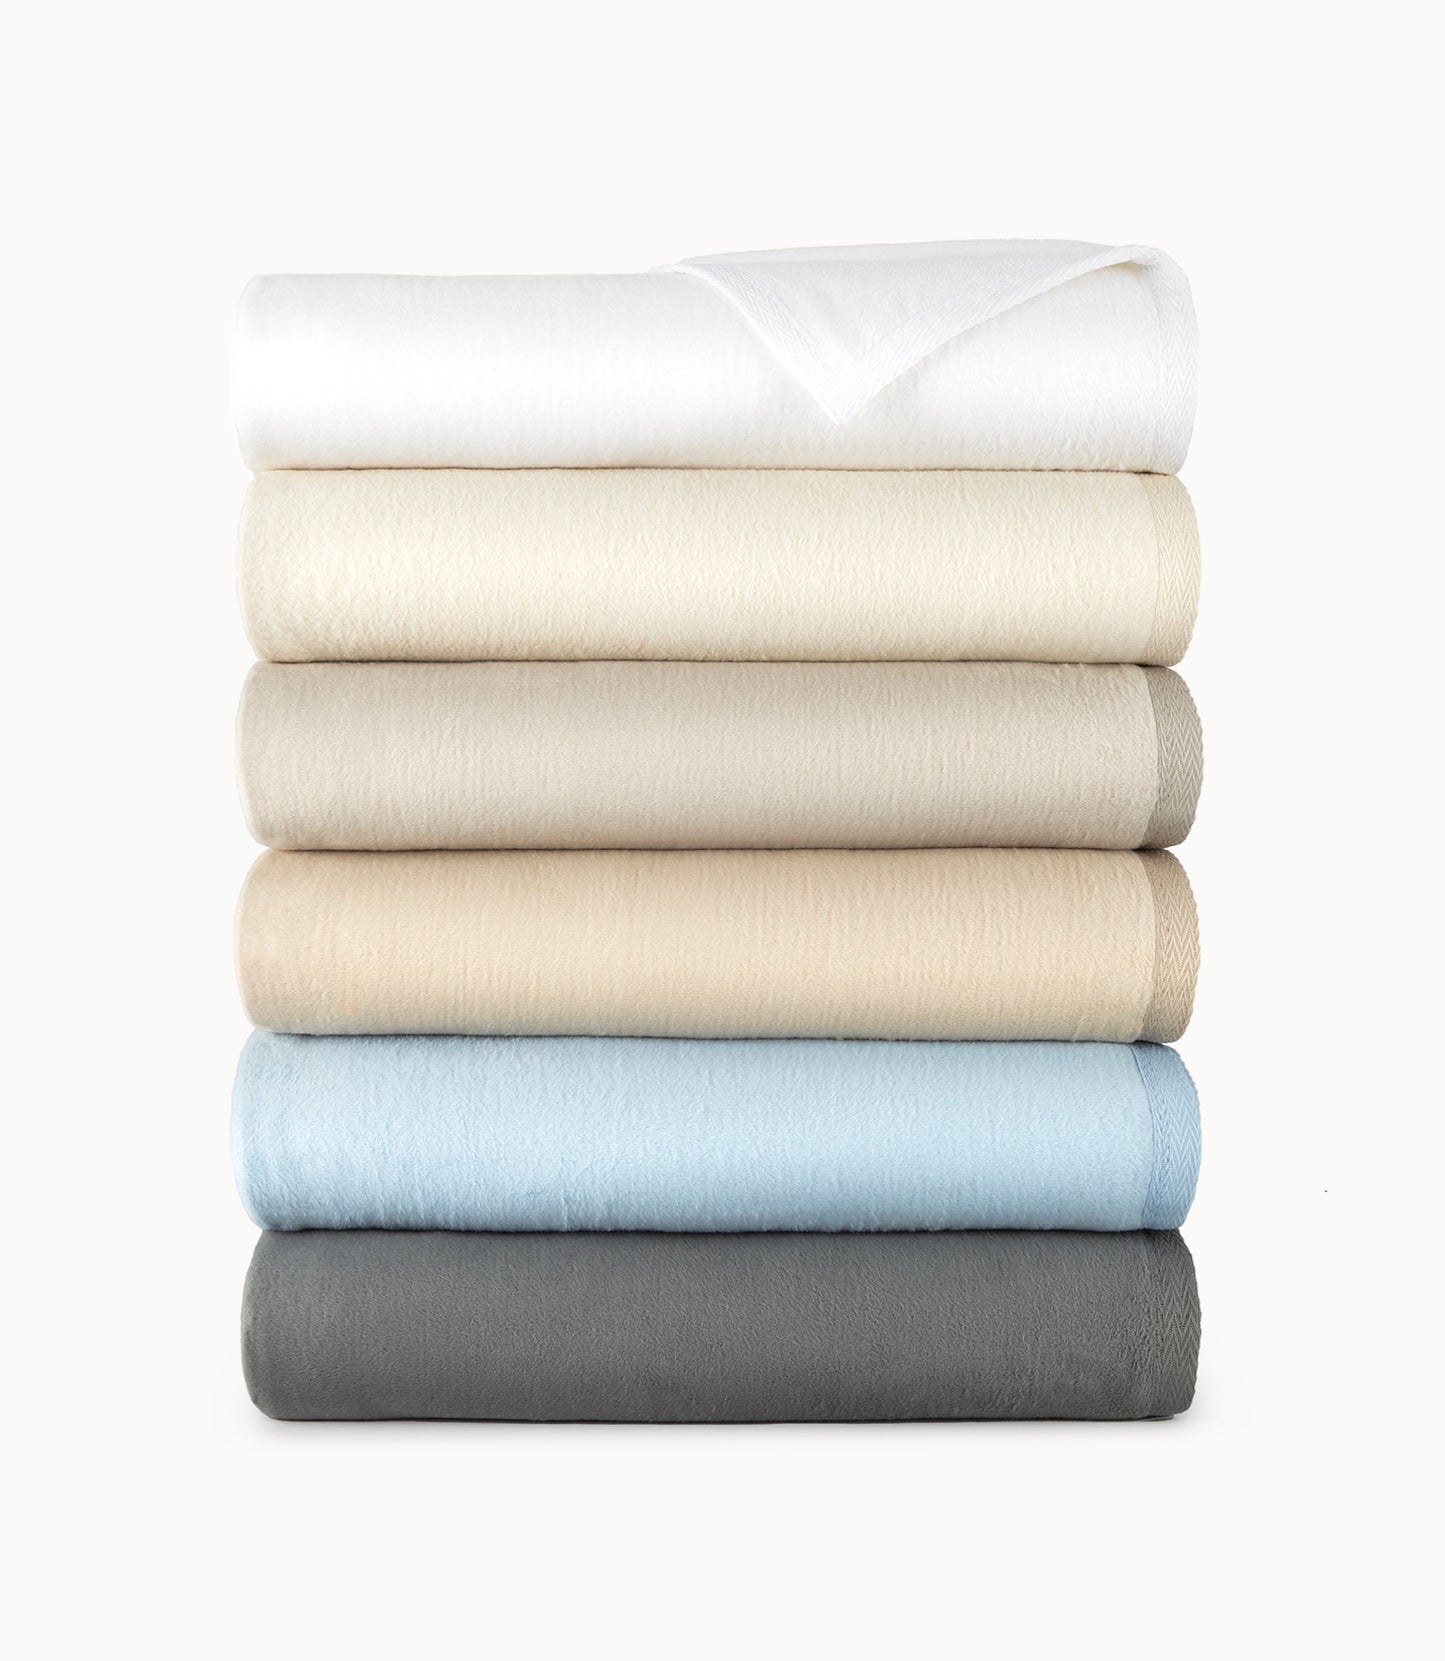 All Seasons Cotton Baby Blanket Stack Multiple Colors White Linen Natural Blue  Gray Blush